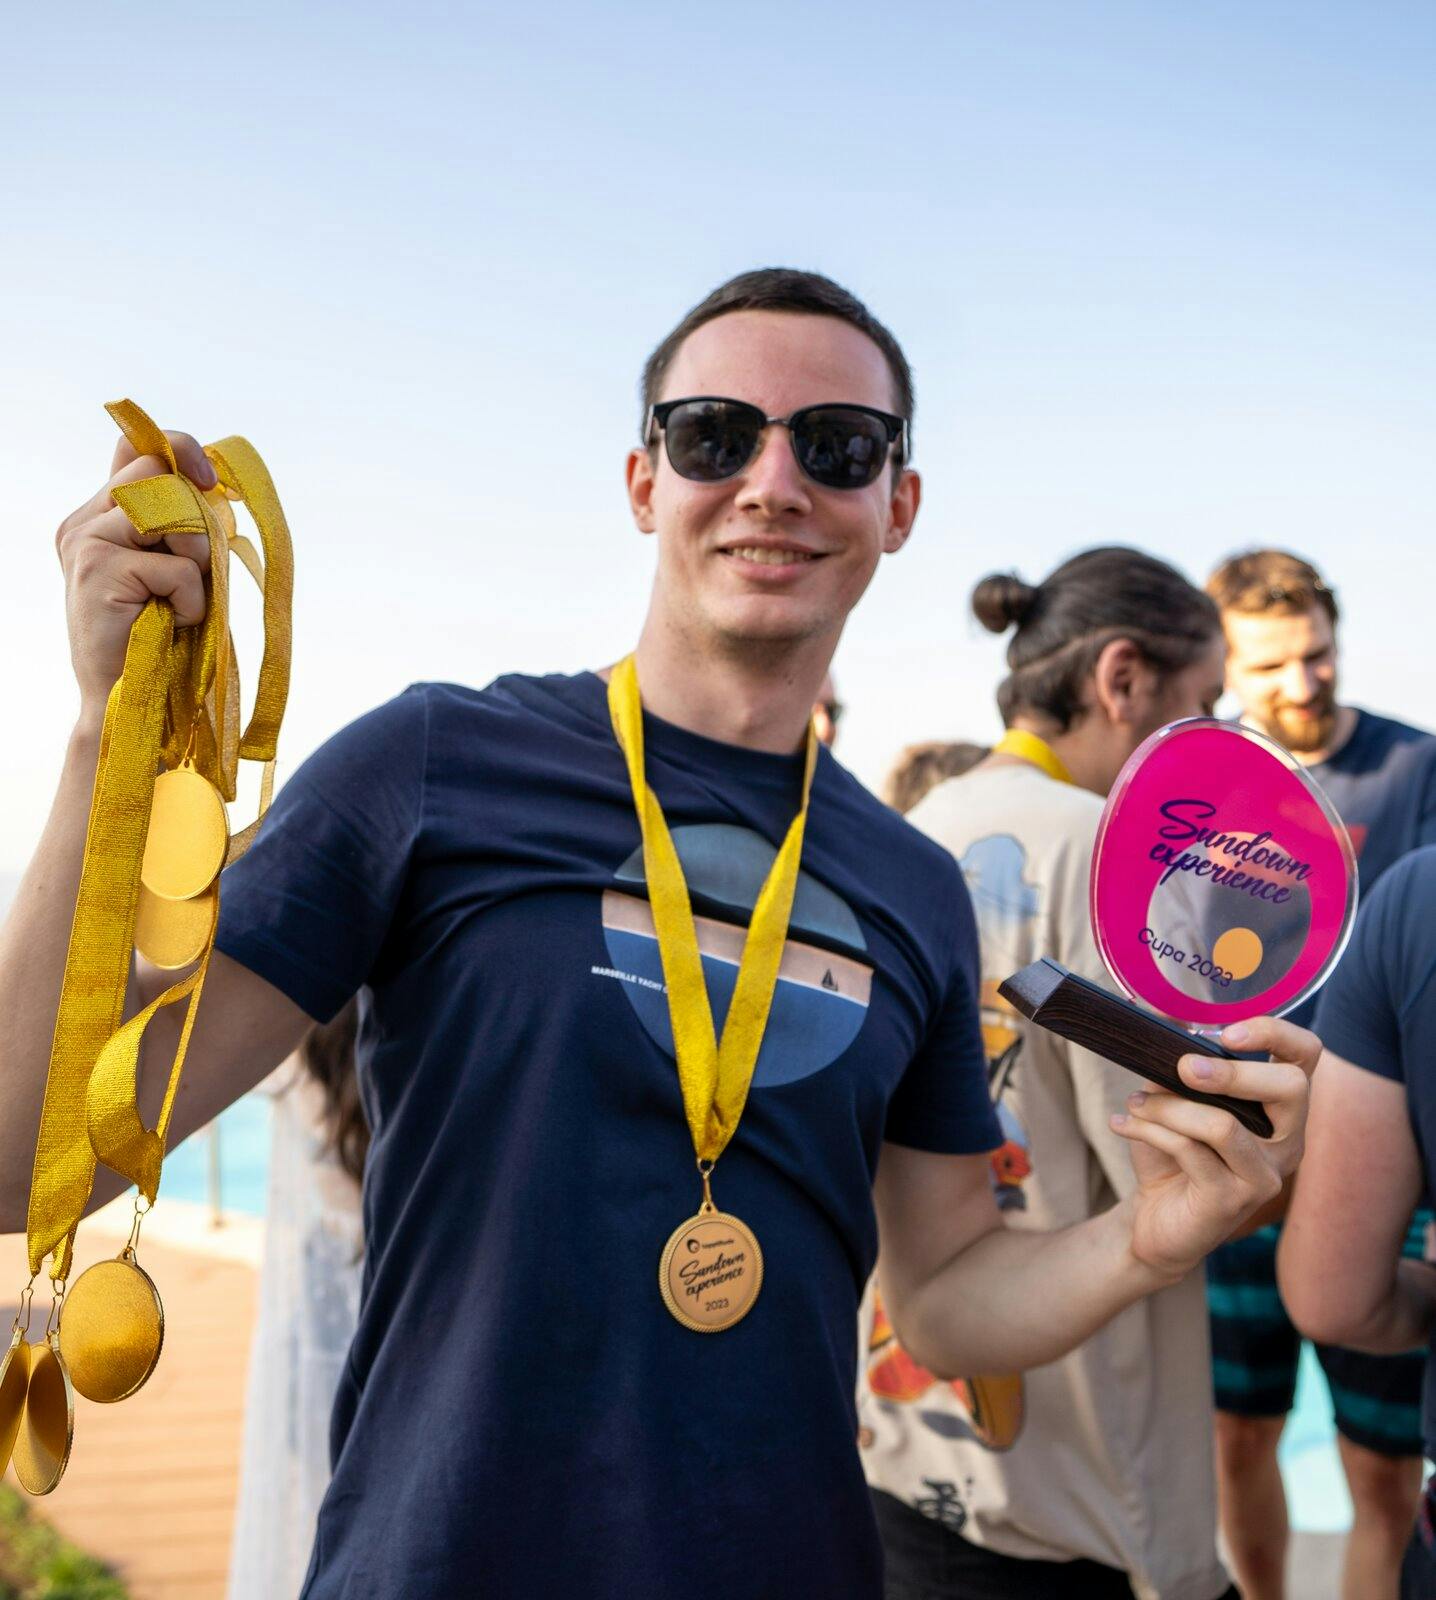 Person holding medals from a party